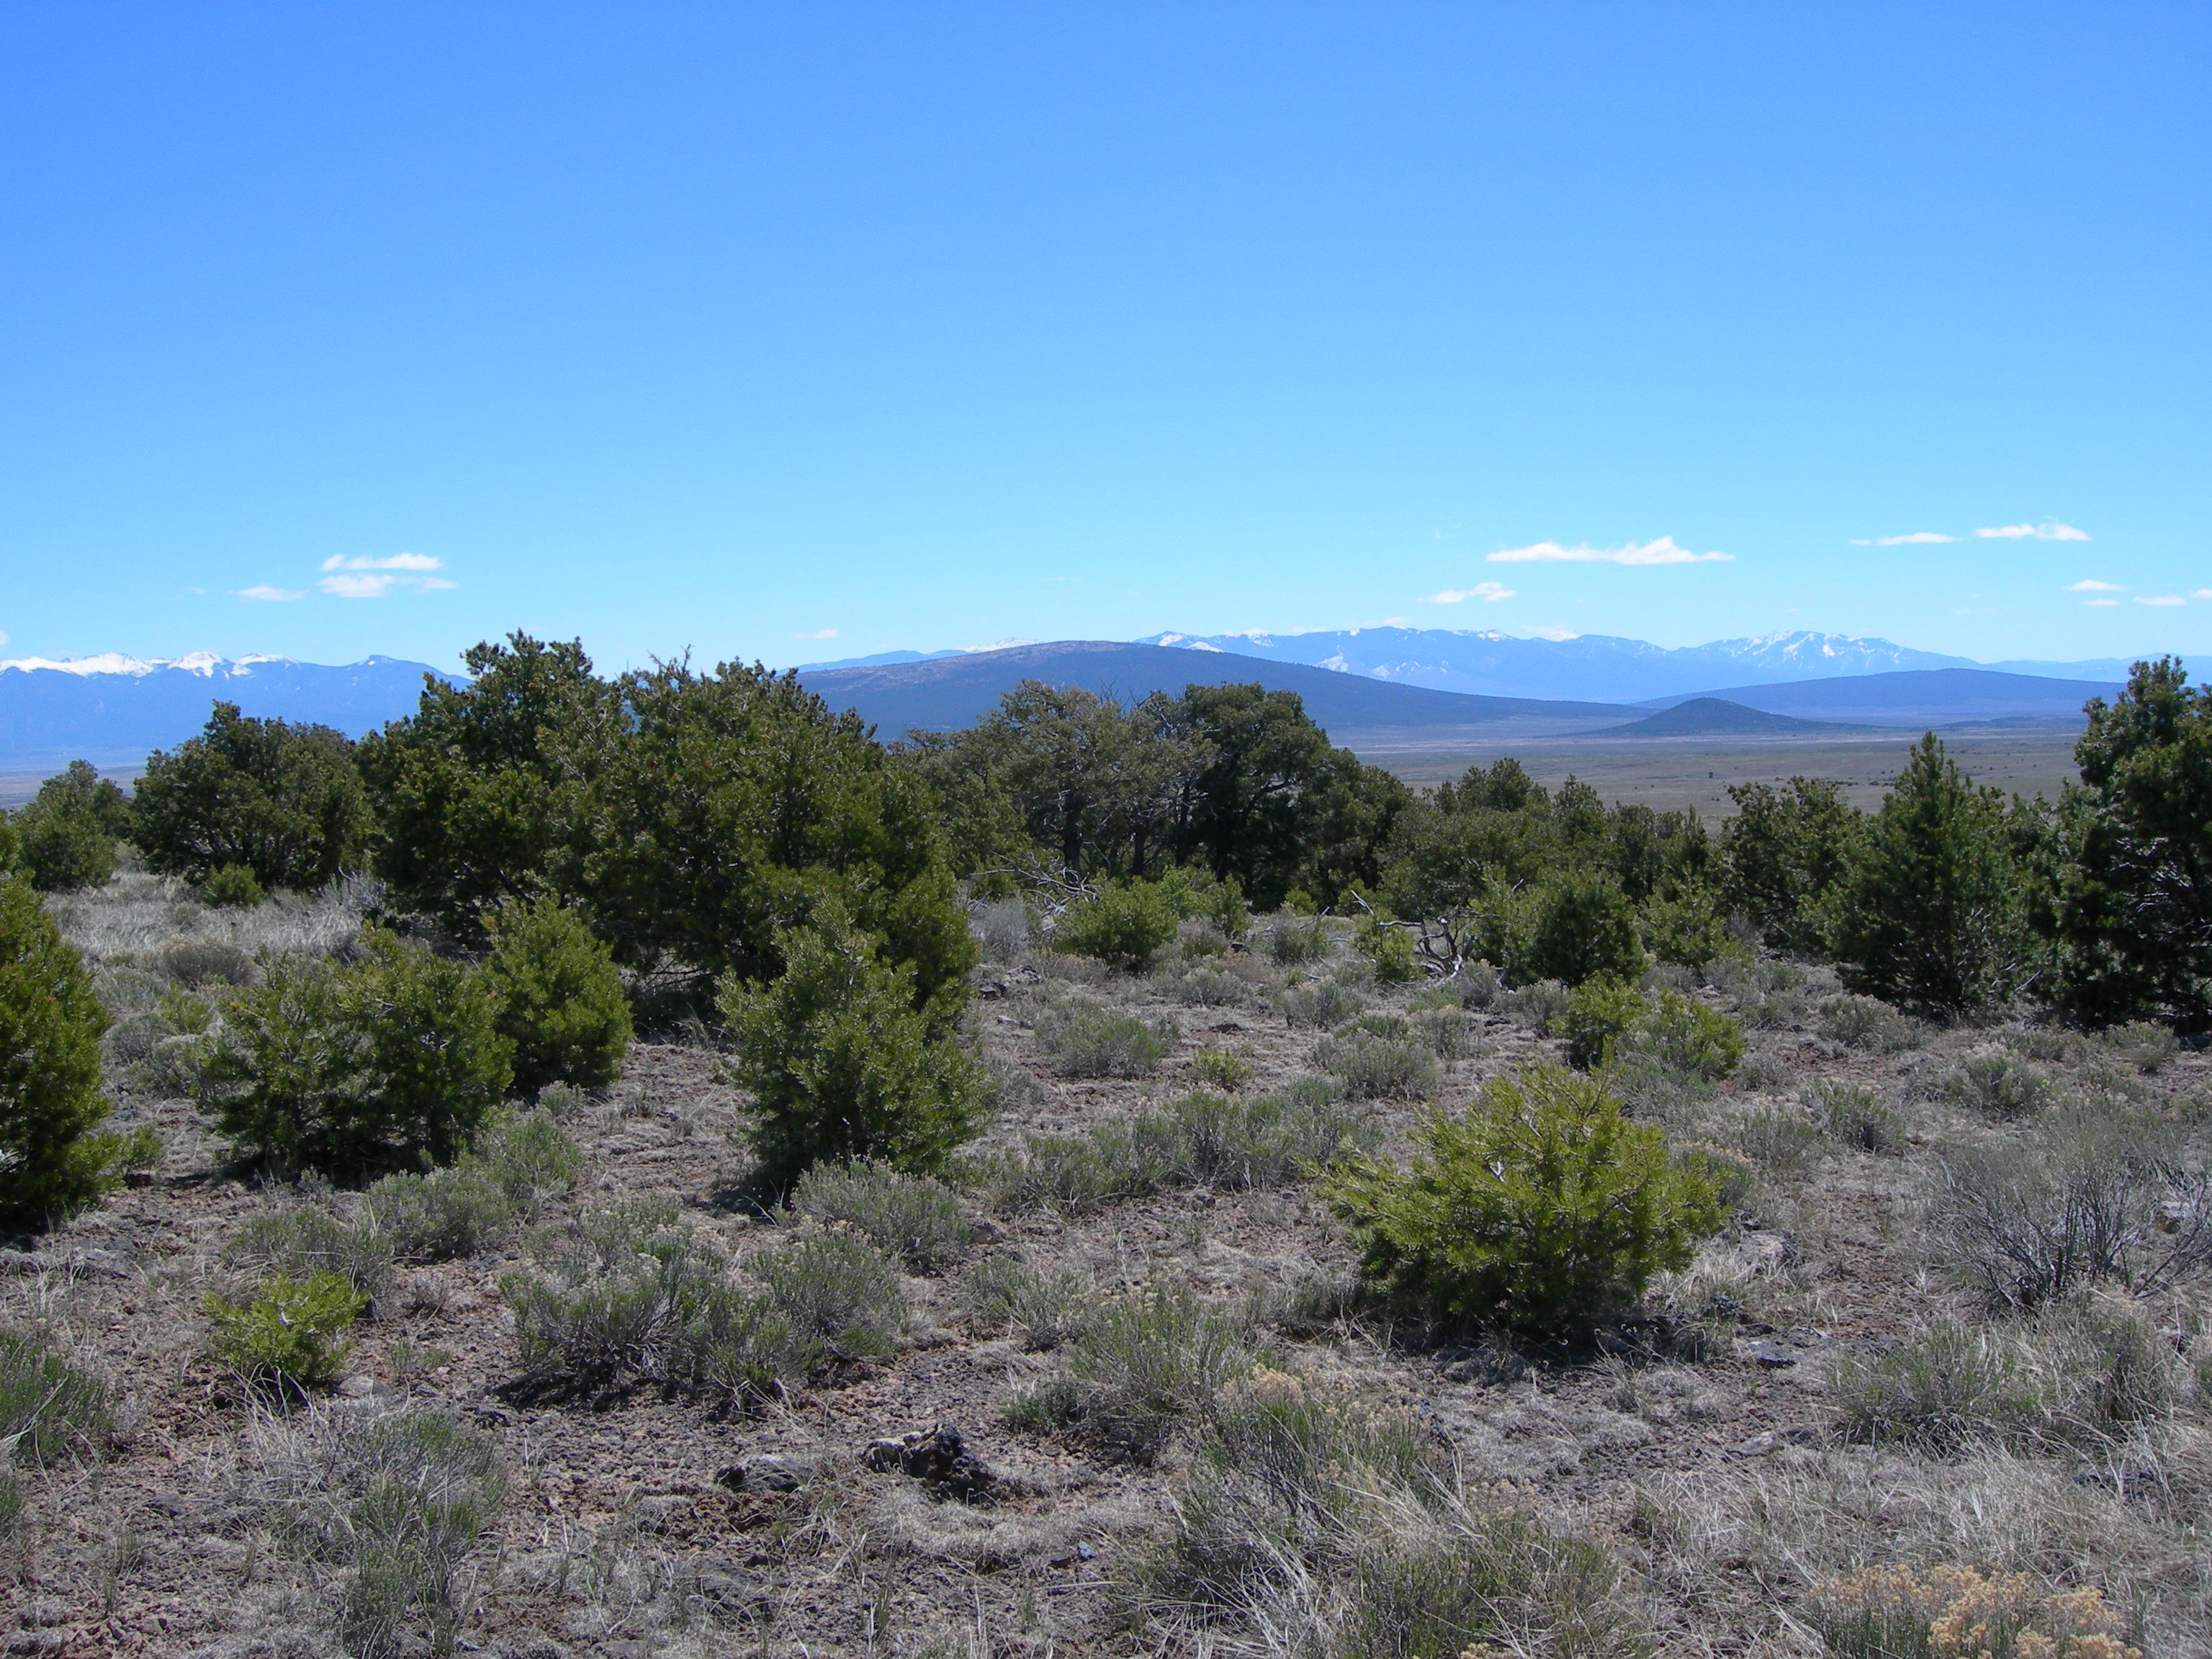 Landscape image of the southwest montane in new mexico